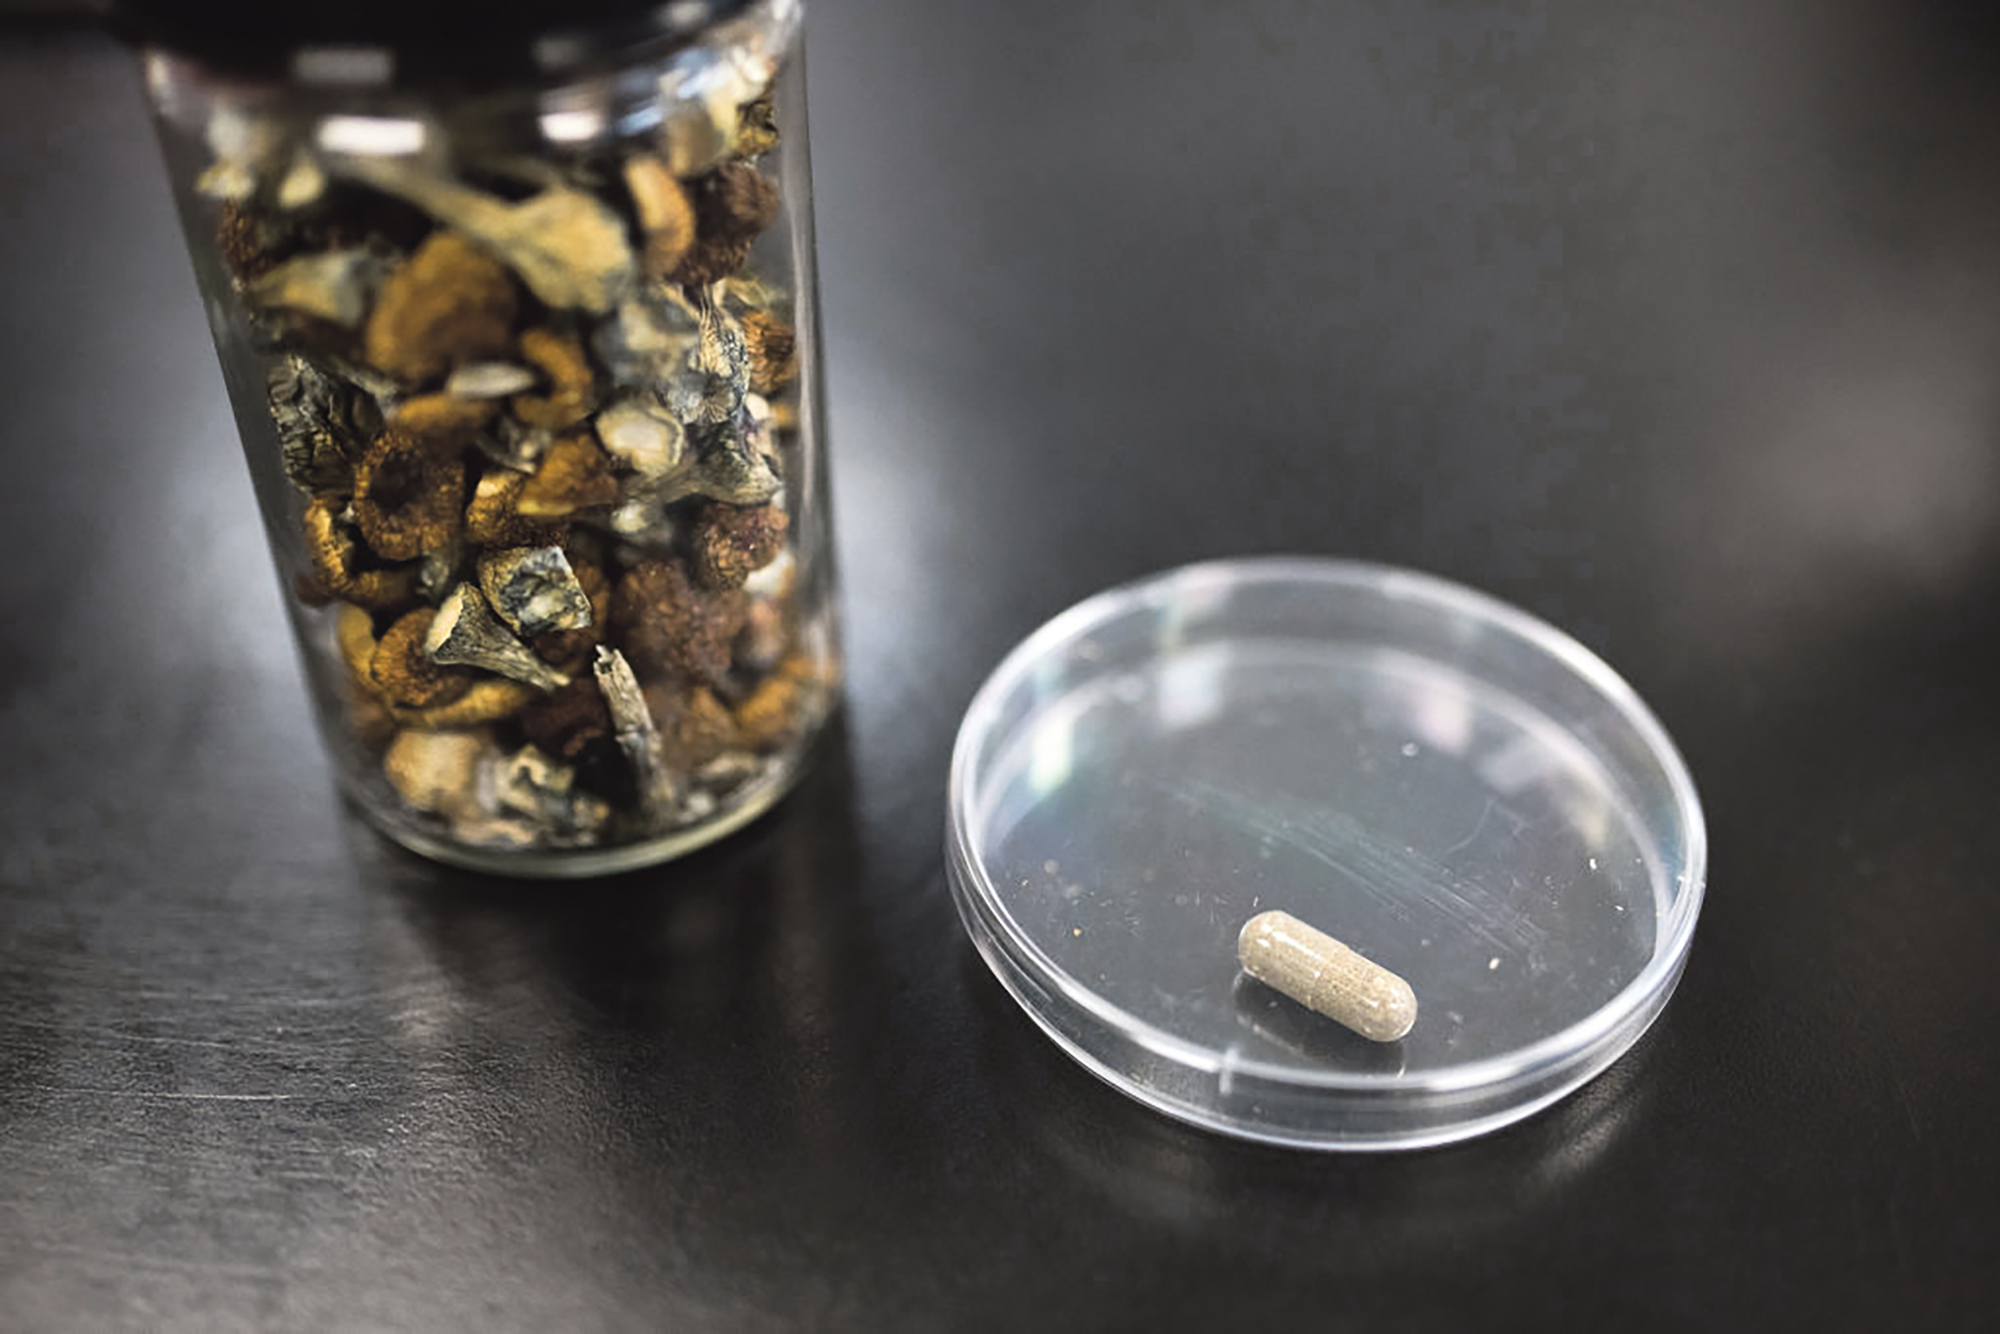 A container of Psilocybe mushrooms, left, alongside the final product in pill form at the Numinus Bioscience lab in Nanaimo, British Columbia, Canada, on Wednesday, Sept. 1, 2021. Numinus Wellness Inc, a mental health care company specializing in psychedelic-assisted therapies was the first public company in Canada to harvest the first legal batch of mushrooms from the Psilocybe genus last year. Photographer: James MacDonald/Bloomberg via Getty Images